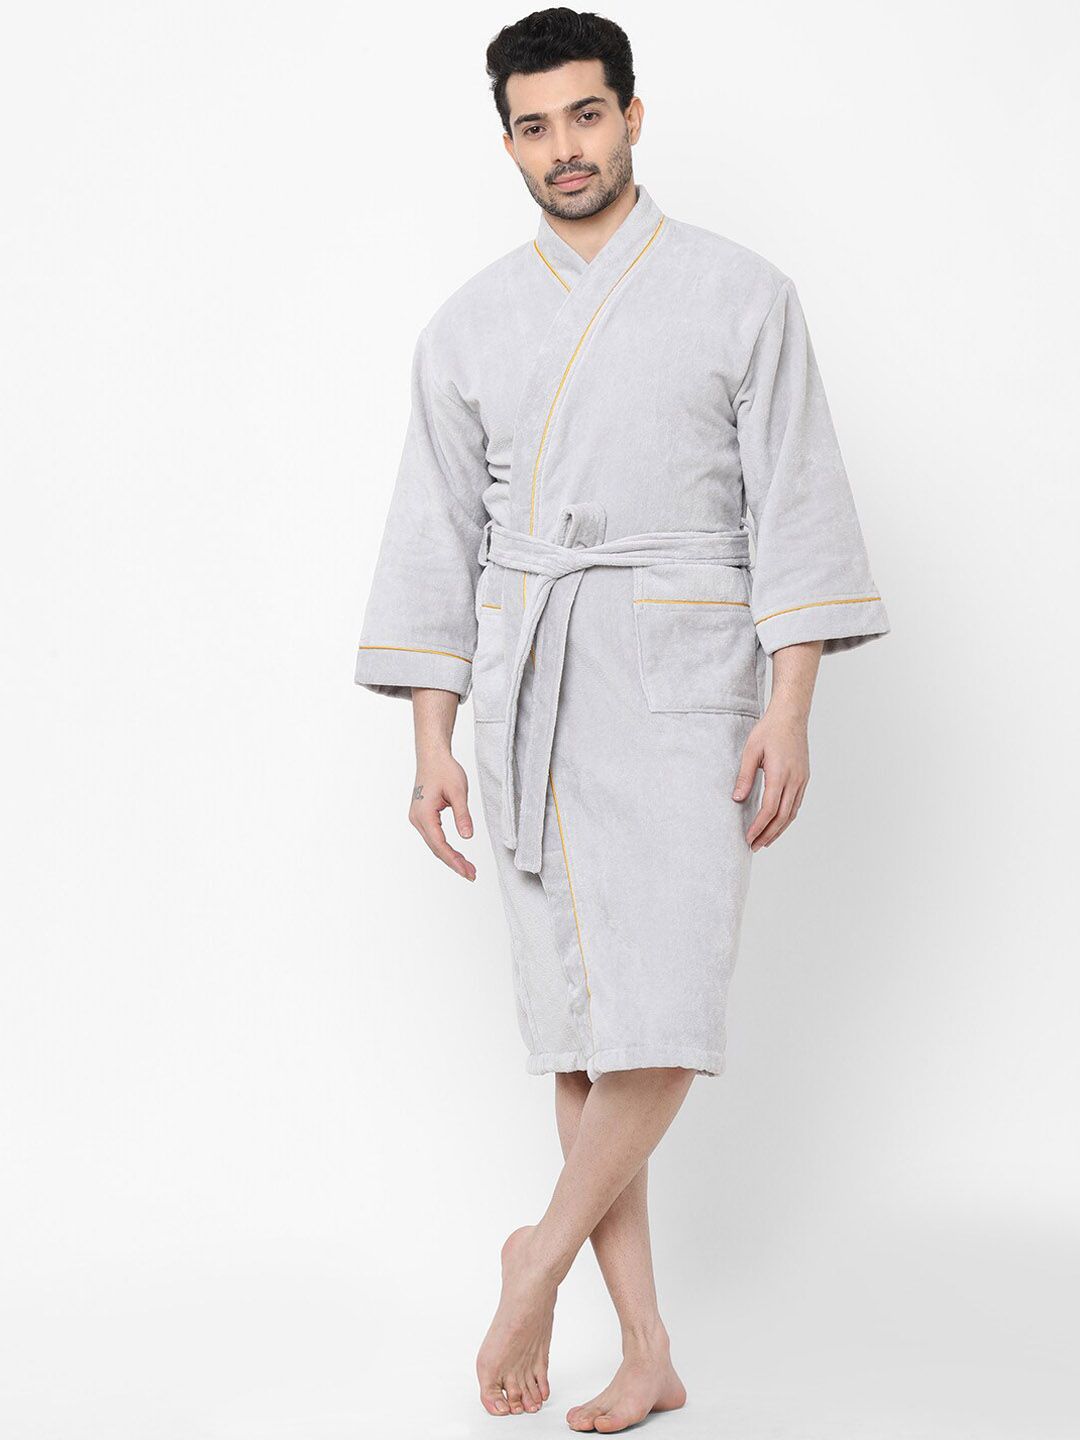 SPACES Grey Solid Pure Cotton Bath Robe With Belt Price in India